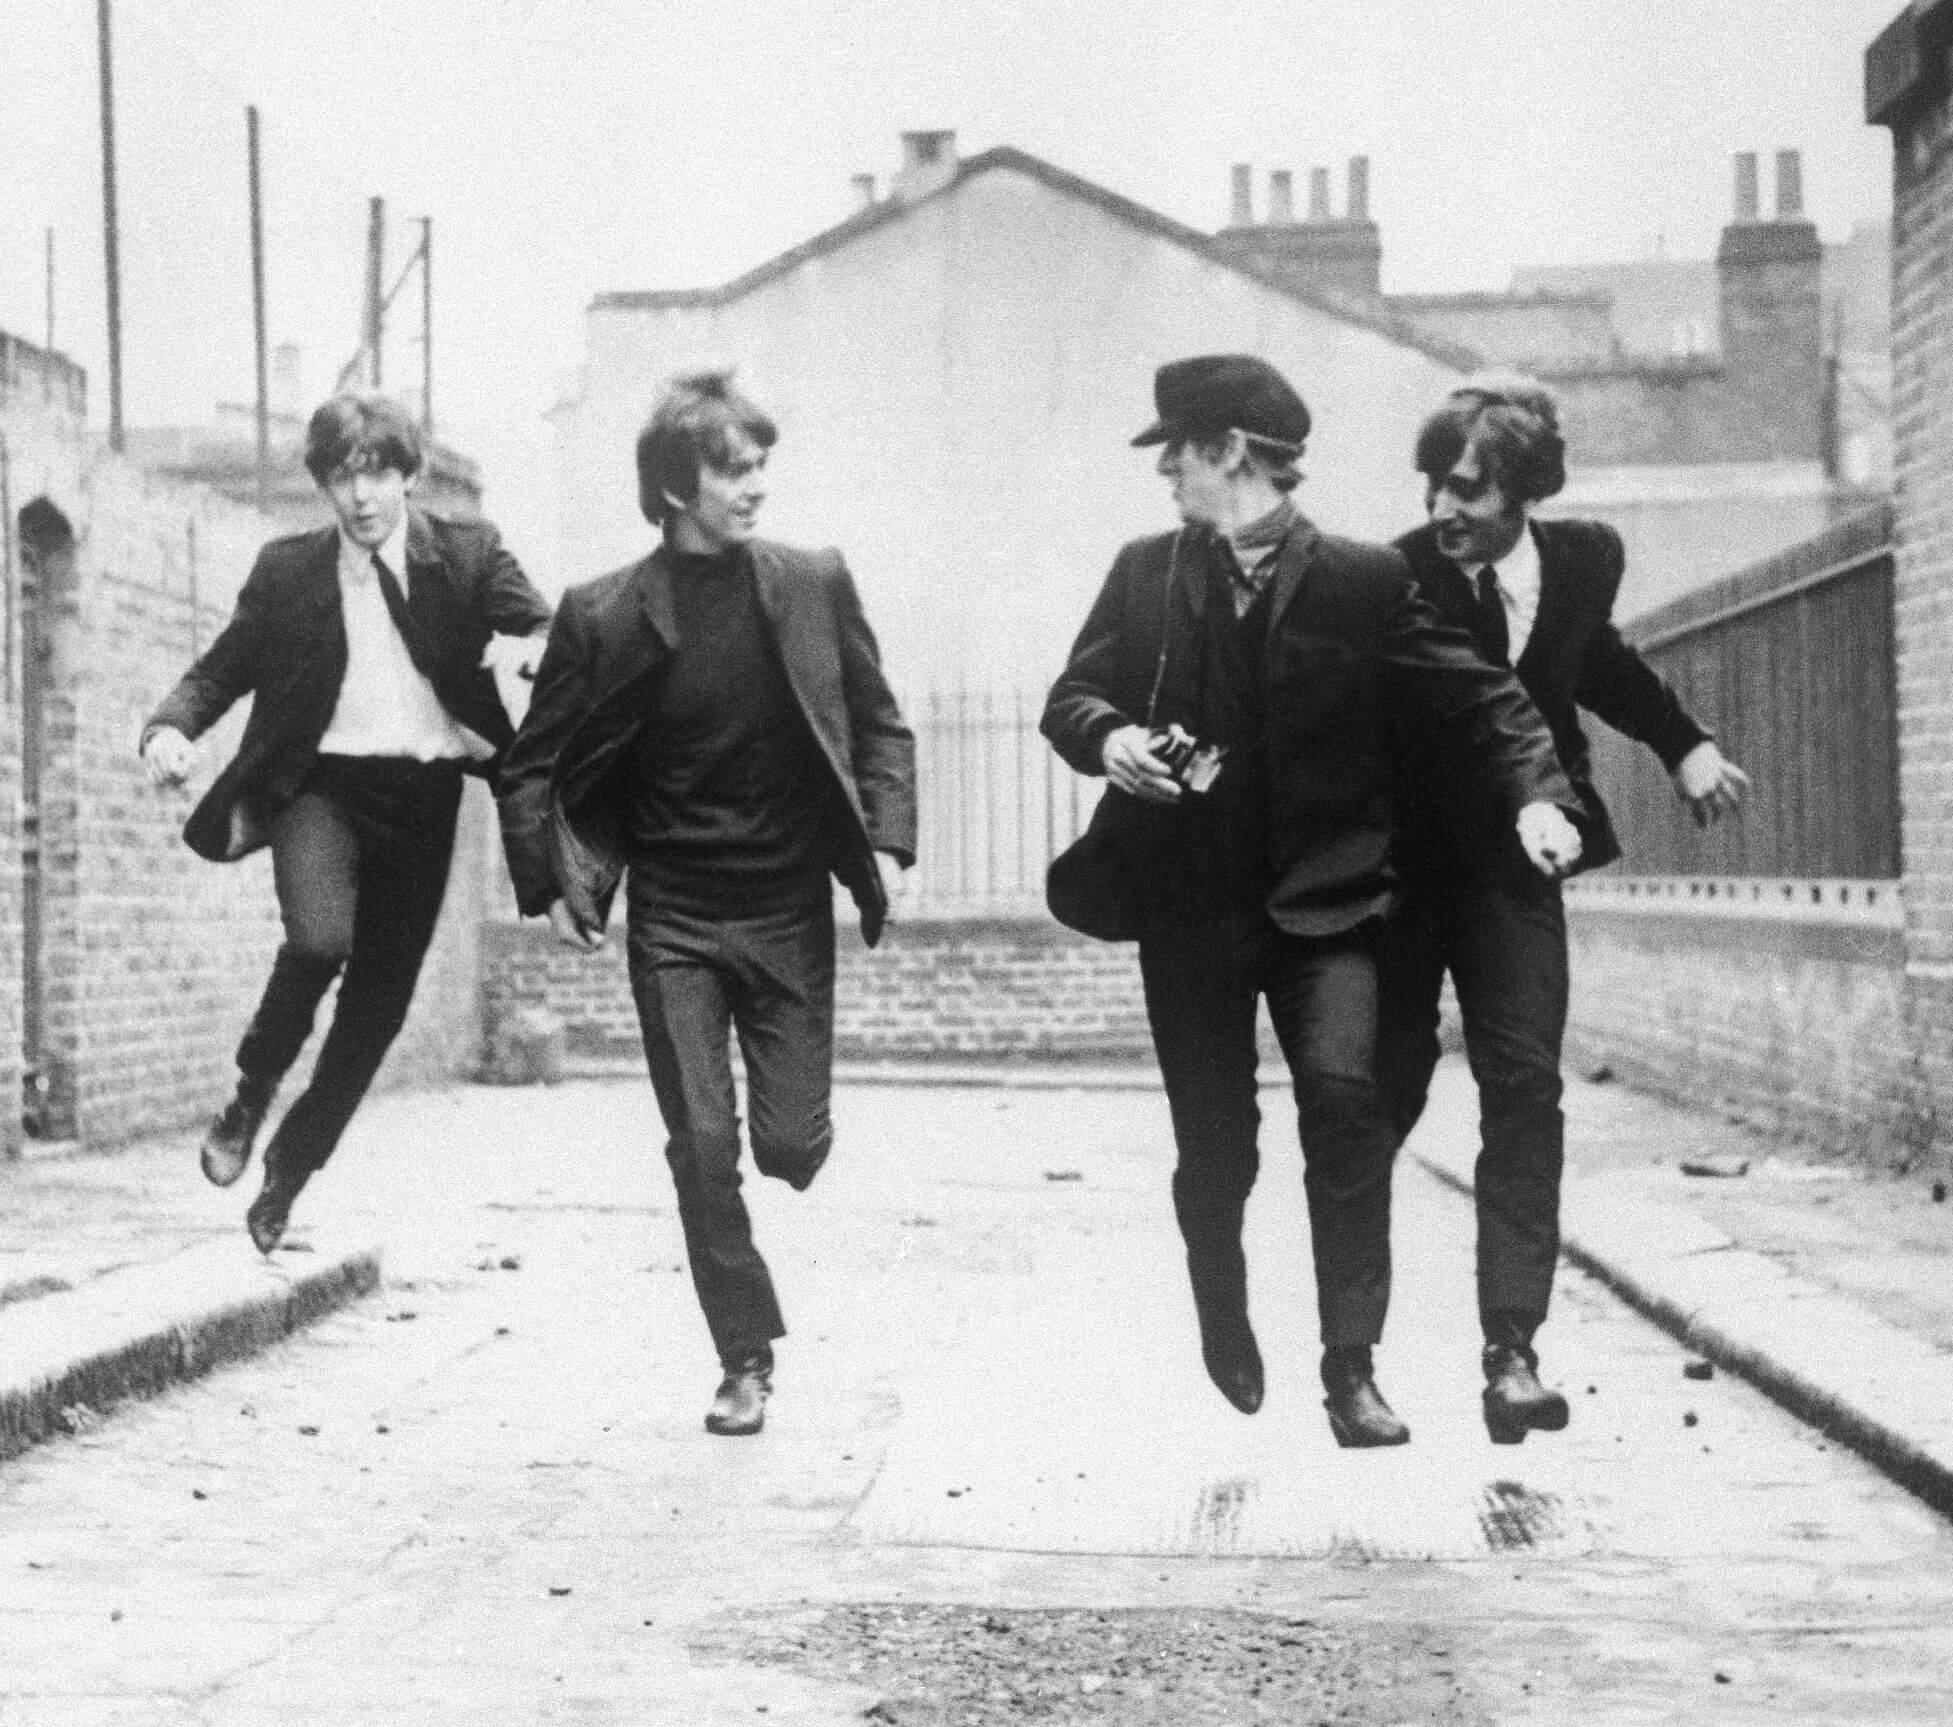 The Beatles running during the "She Loves You" era